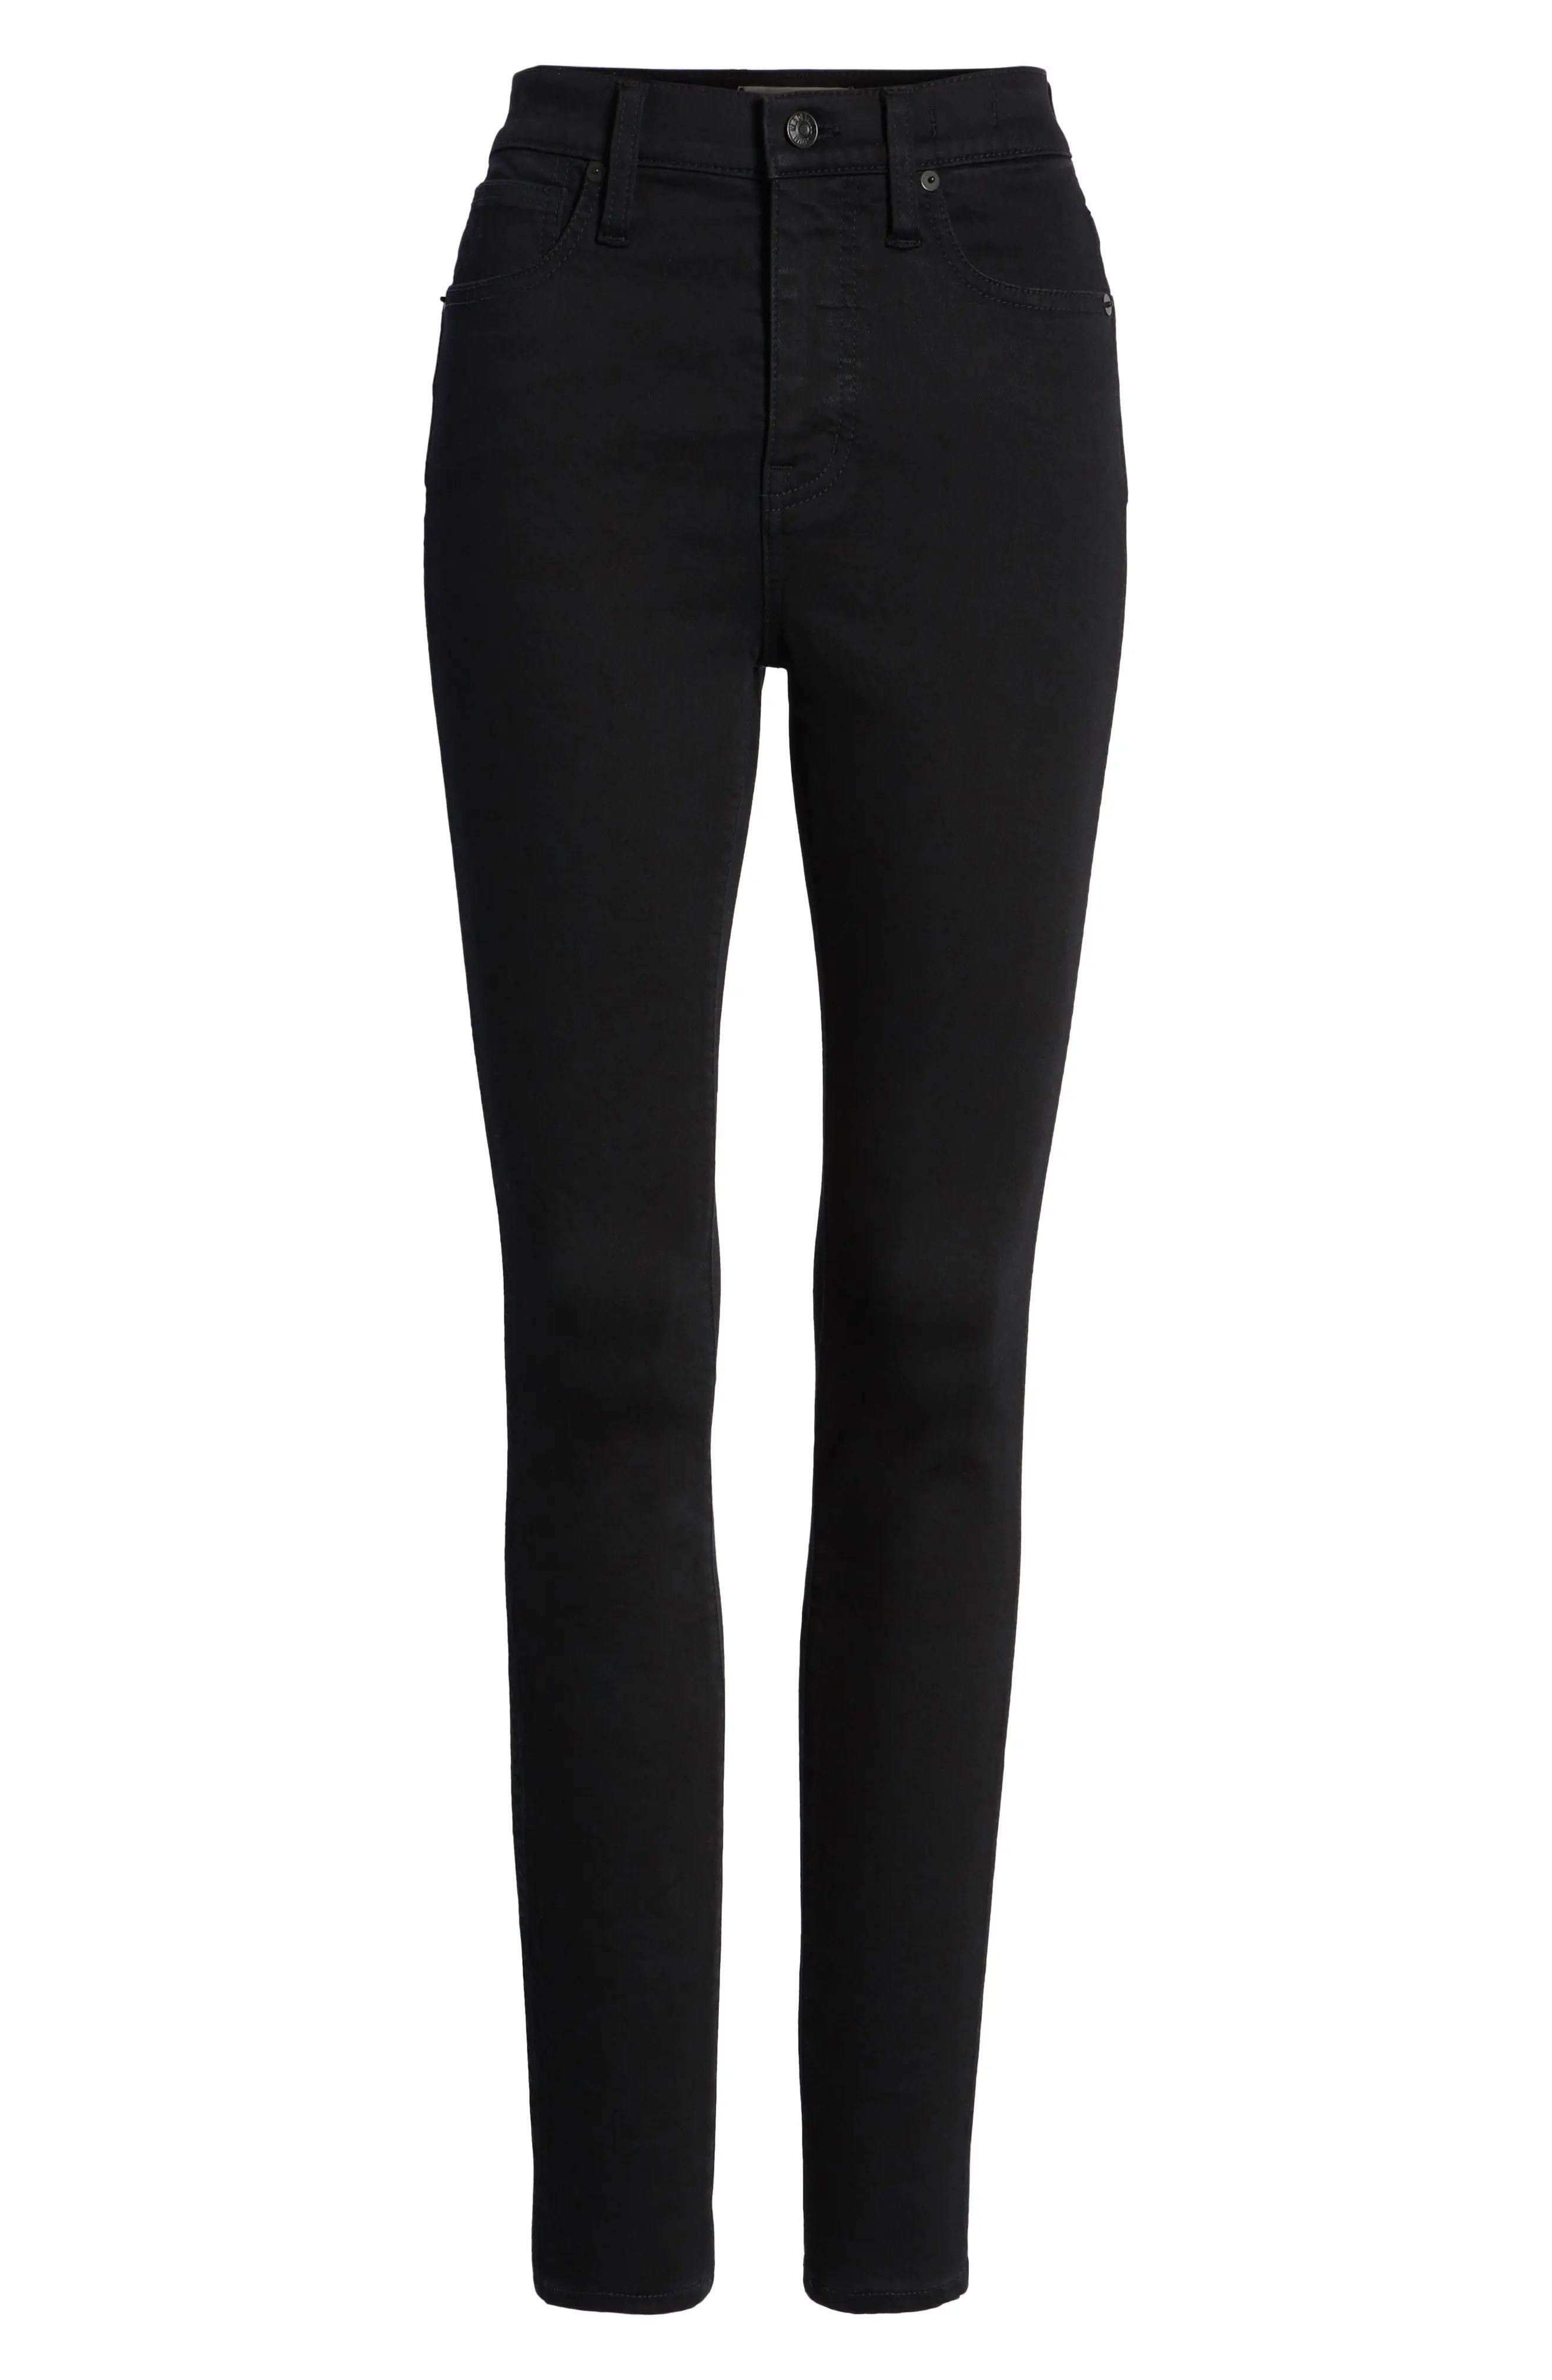 Madewell 10-Inch High Waist Skinny Jeans (Black Frost) | Nordstrom